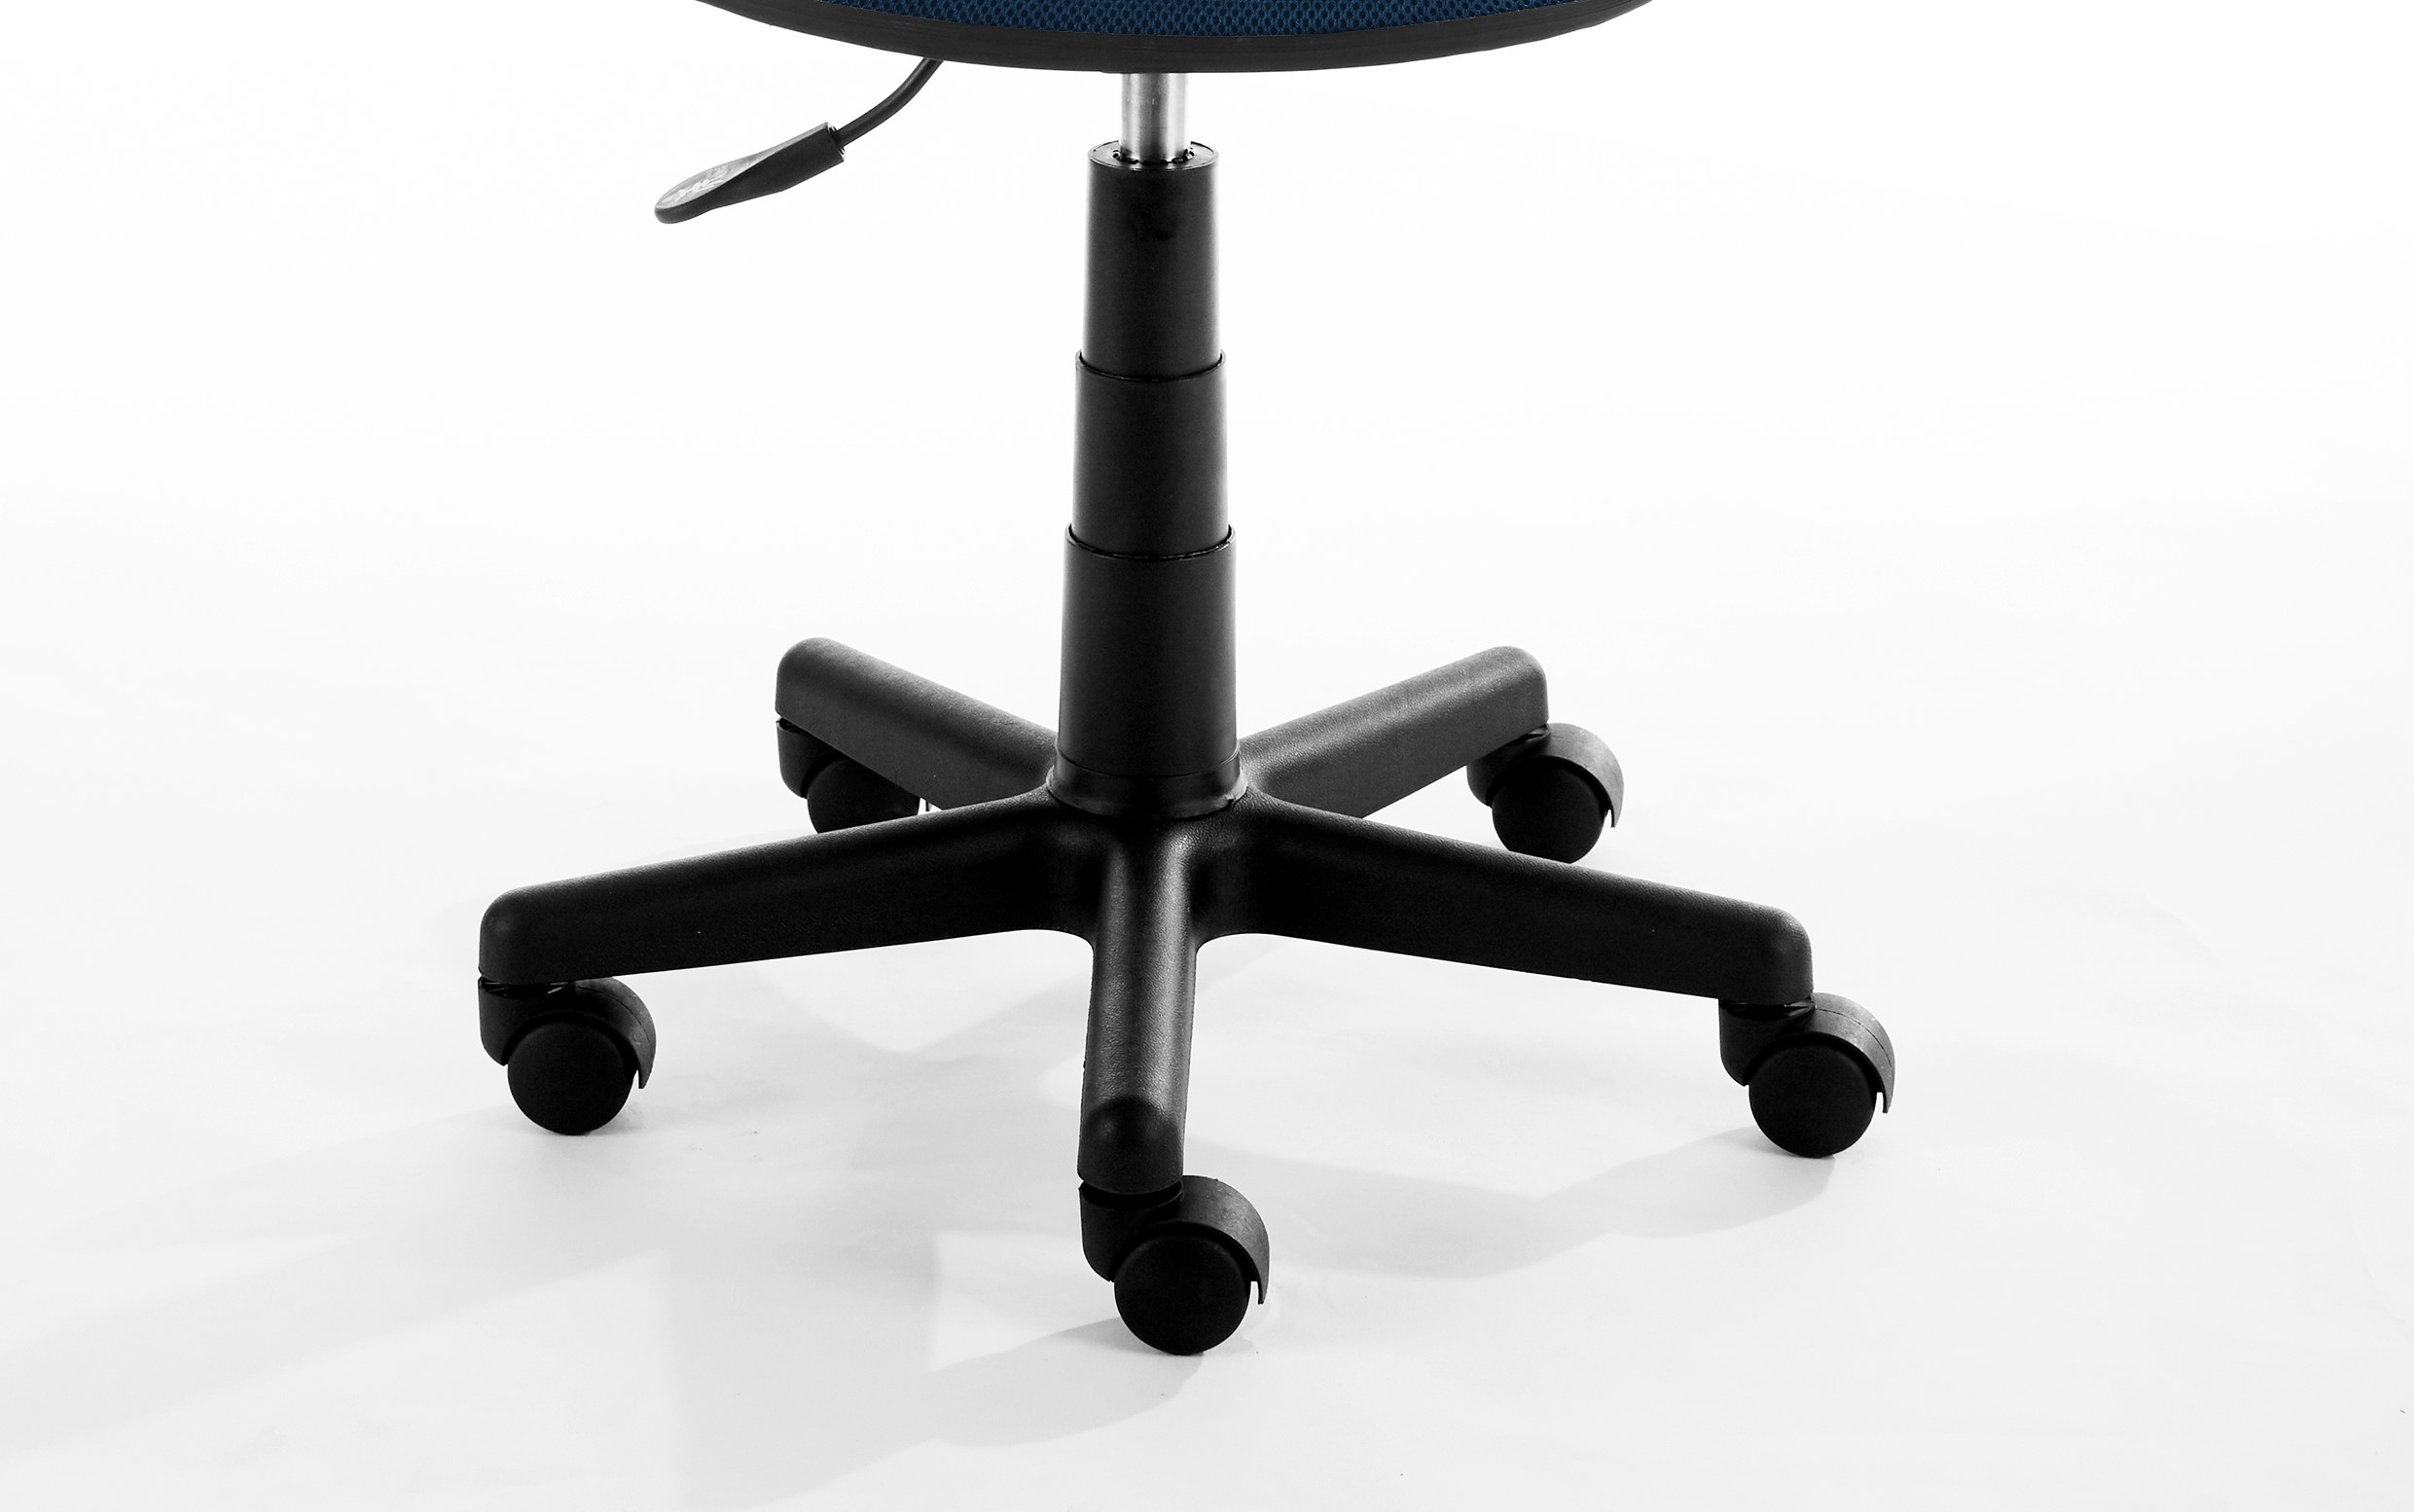 Urban Shop Task Chair with Adjustable Height & Swivel, 225 lb. Capacity, Multiple Colors - image 3 of 5